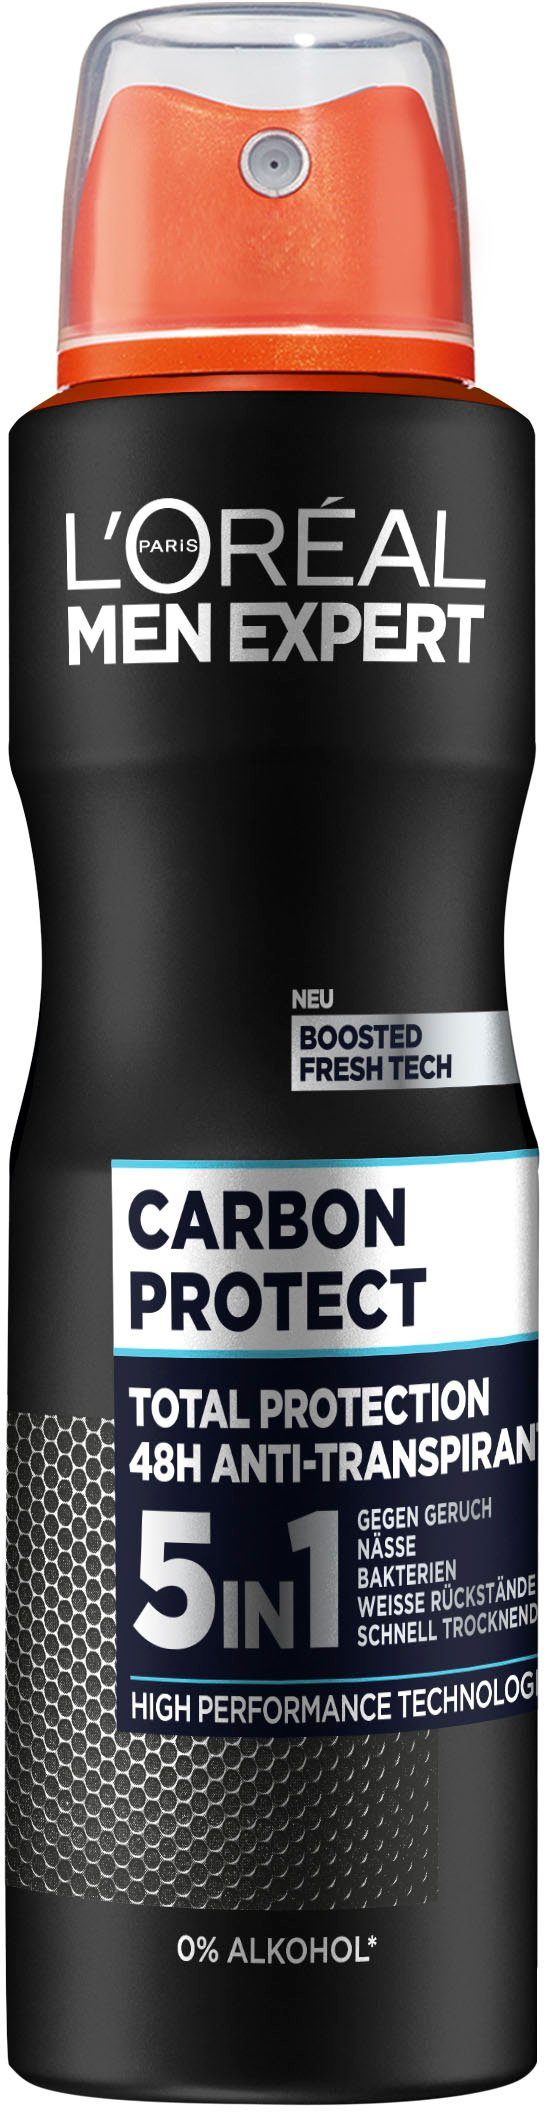 L'ORÉAL Packung, MEN Spray Deo-Spray EXPERT Protect Deo Carbon 5-in-1, PARIS 6-tlg.